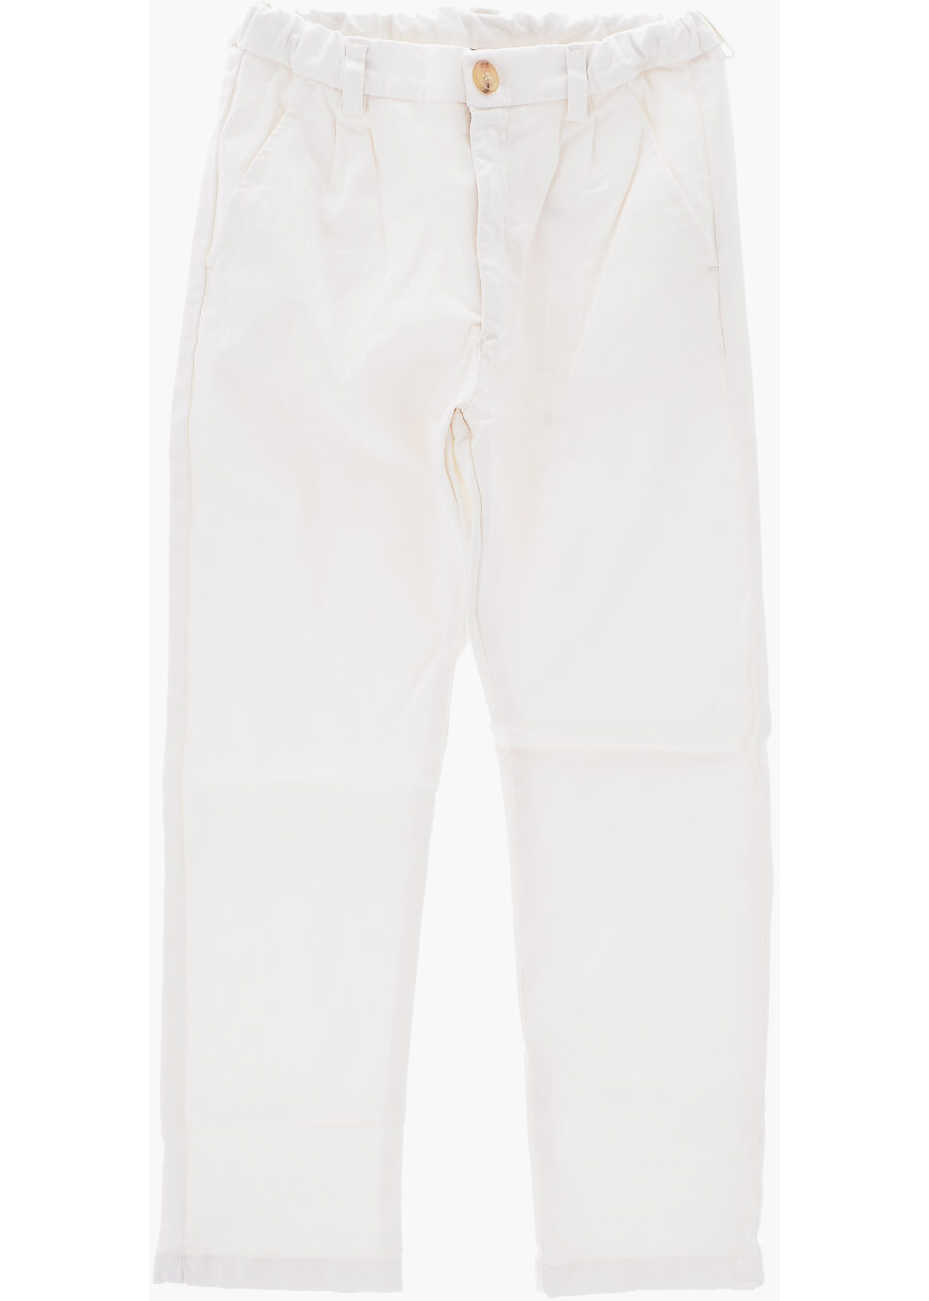 Bonpoint Double Pleated Solid Color Pants White